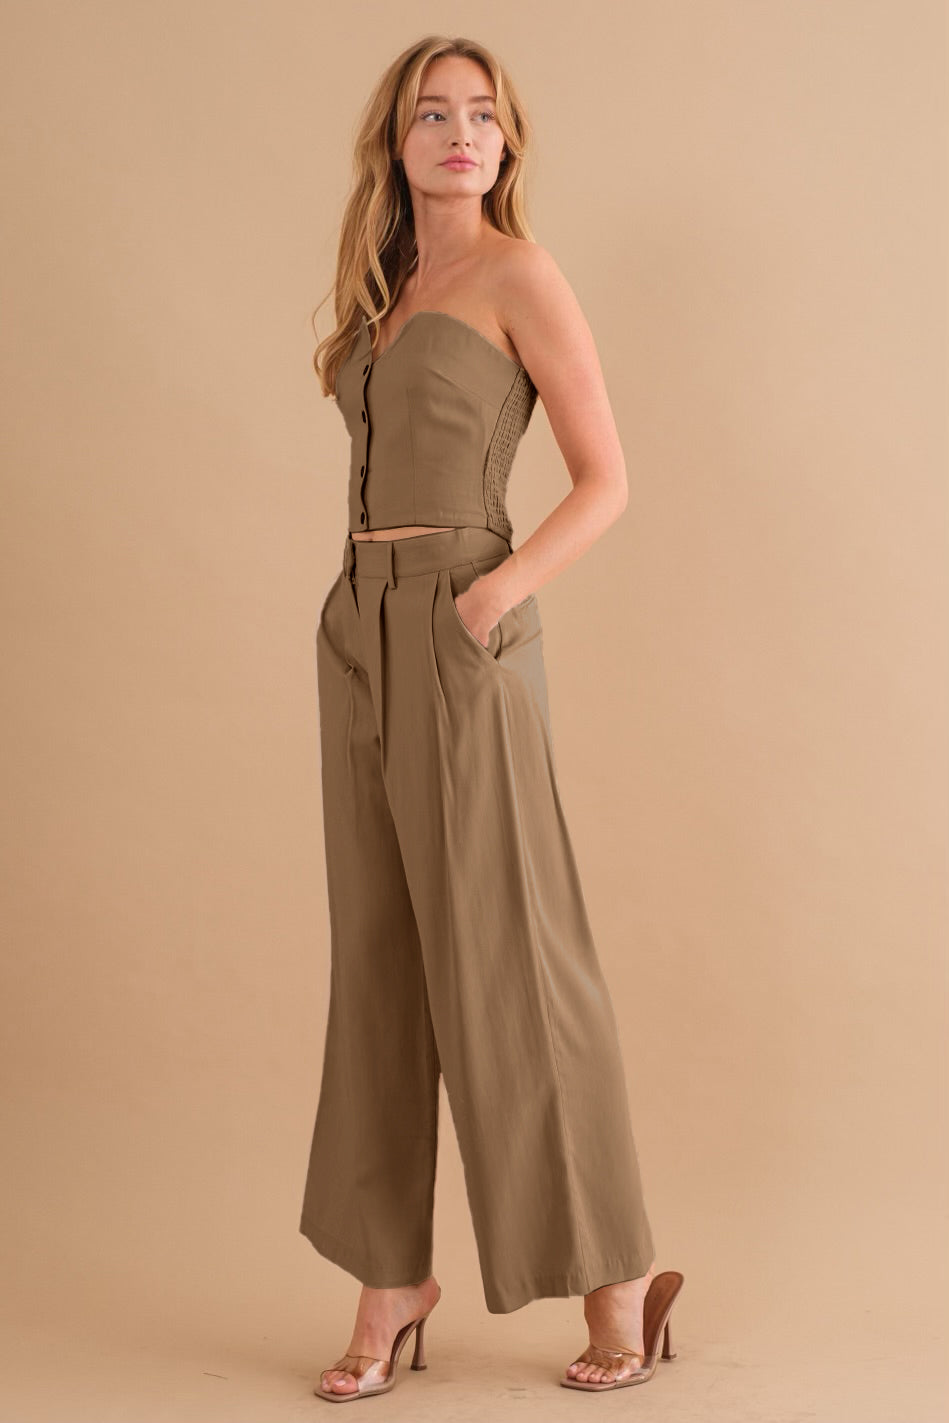 A model wearing a tan two piece strapless top and pant set against a tan wall. 